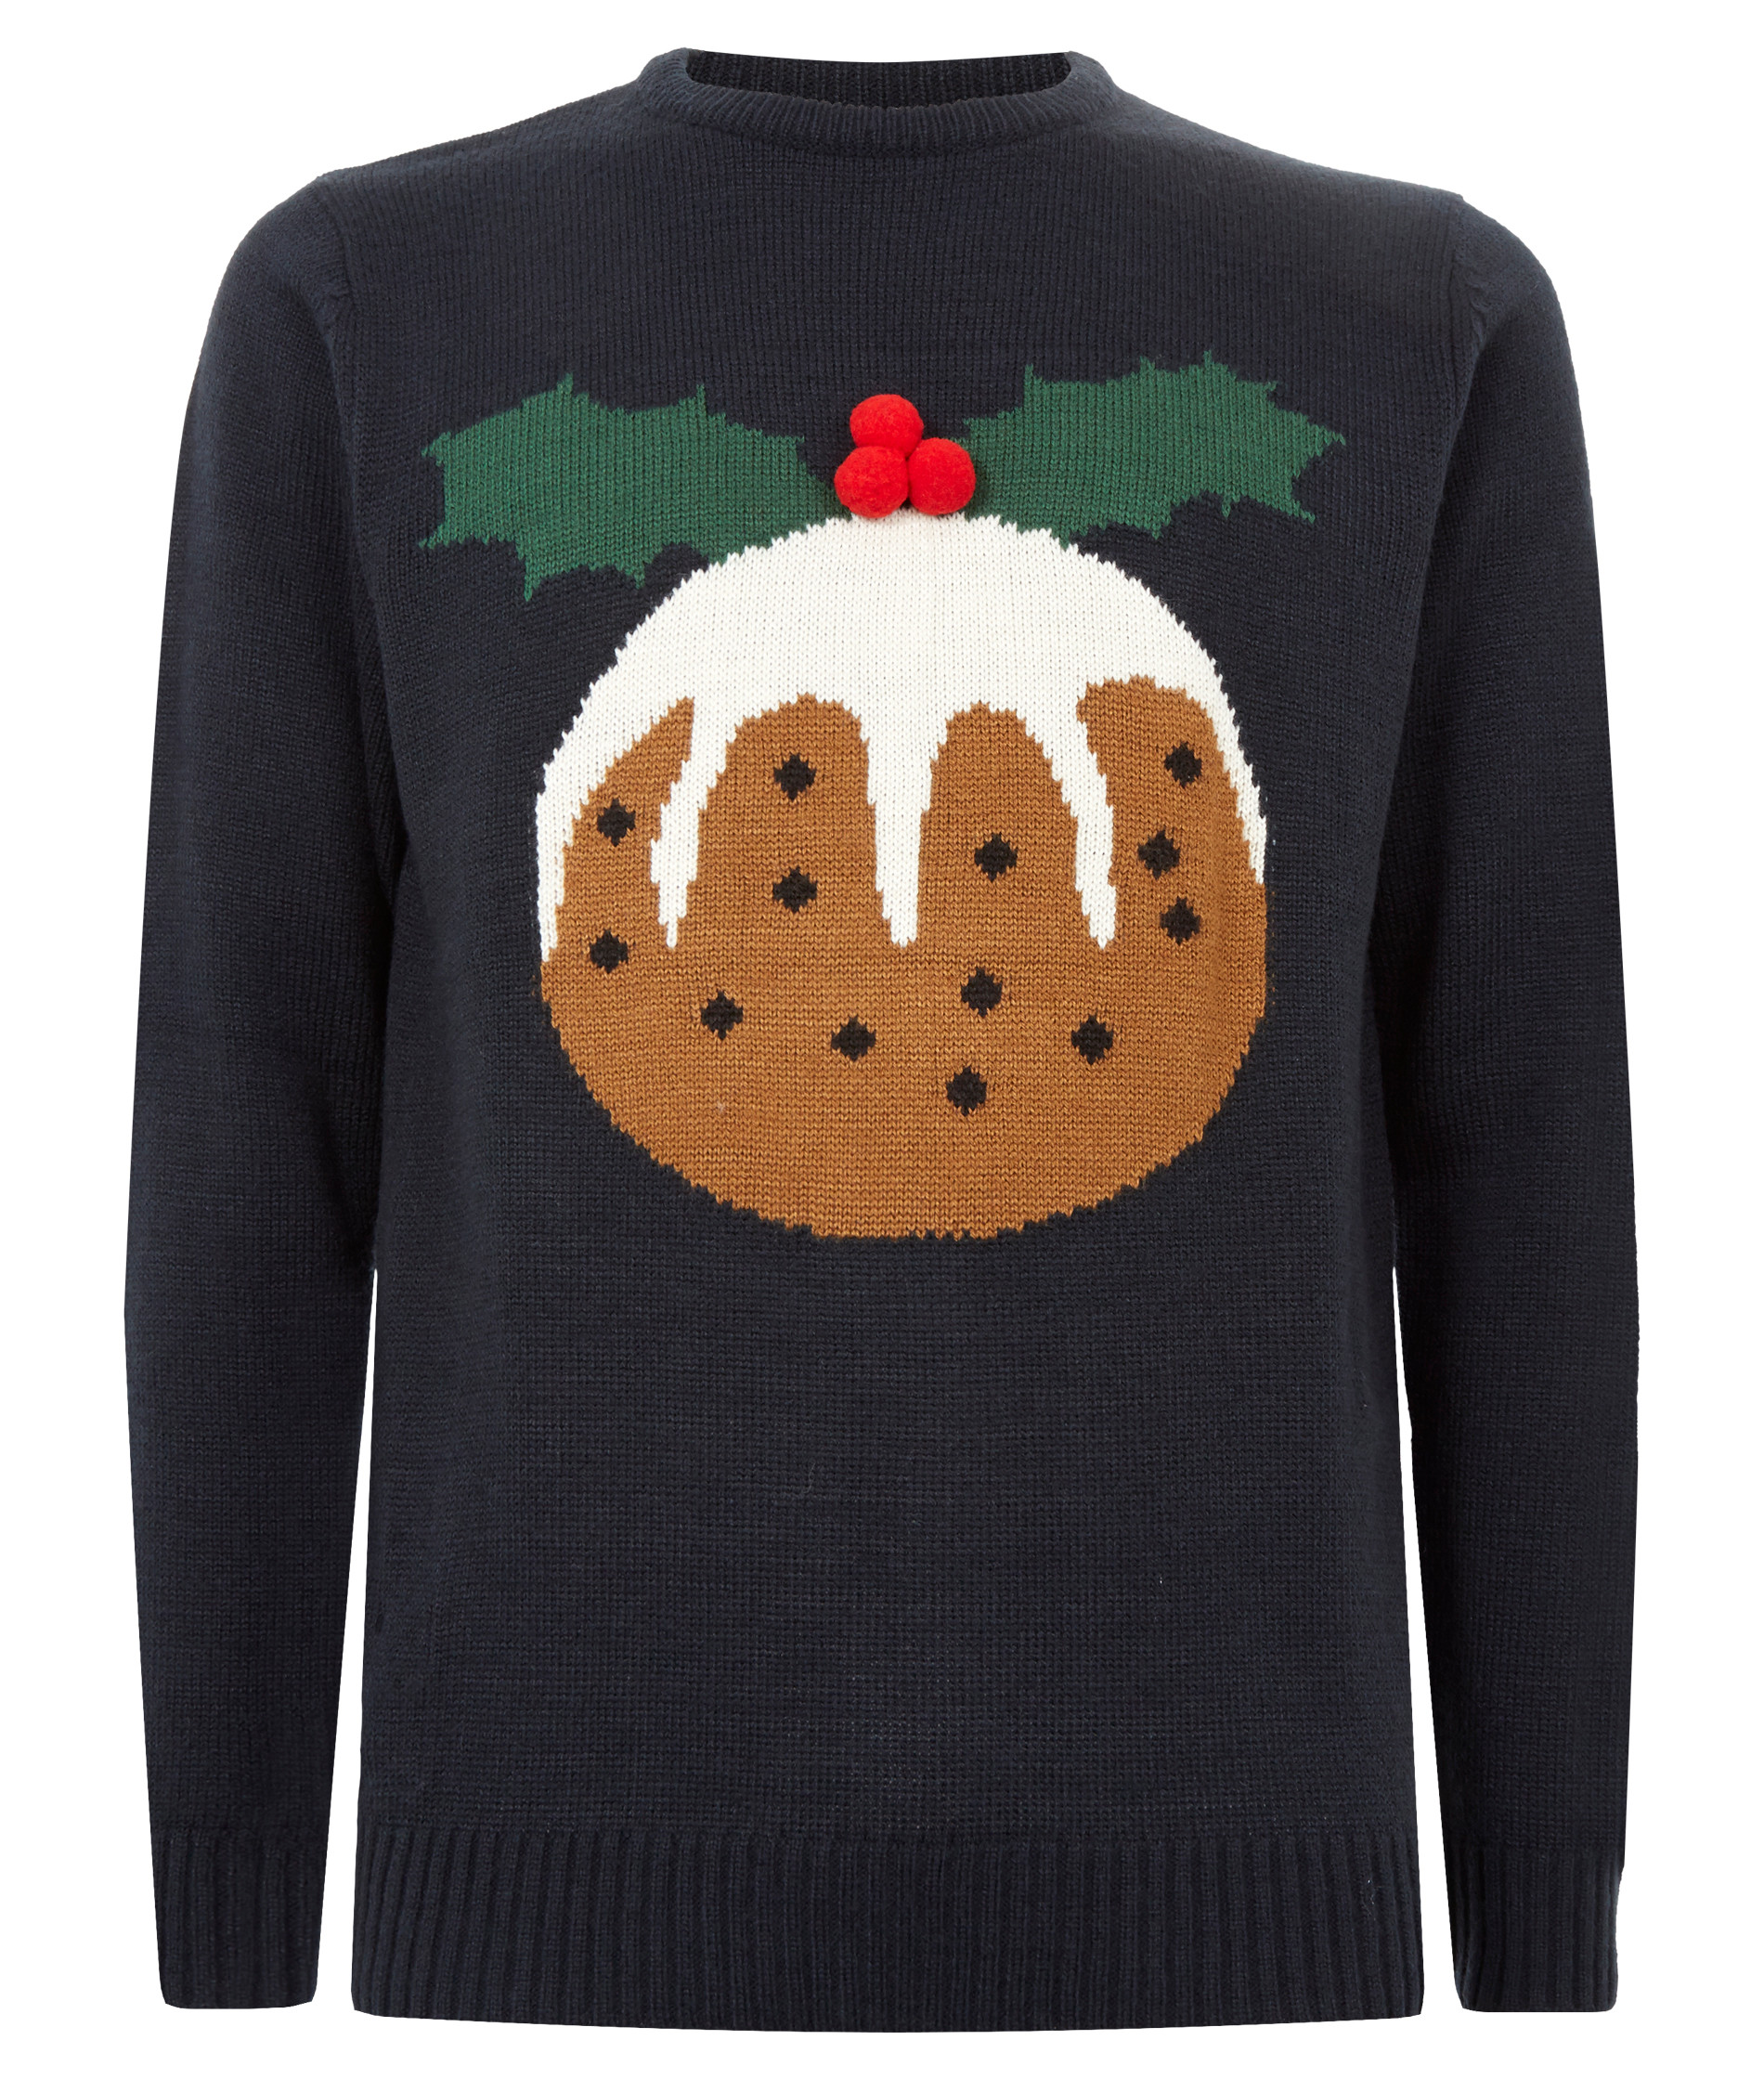 christmas jumper christmas jumpers are already available to buy now! or you could try making  your MKOOEBC